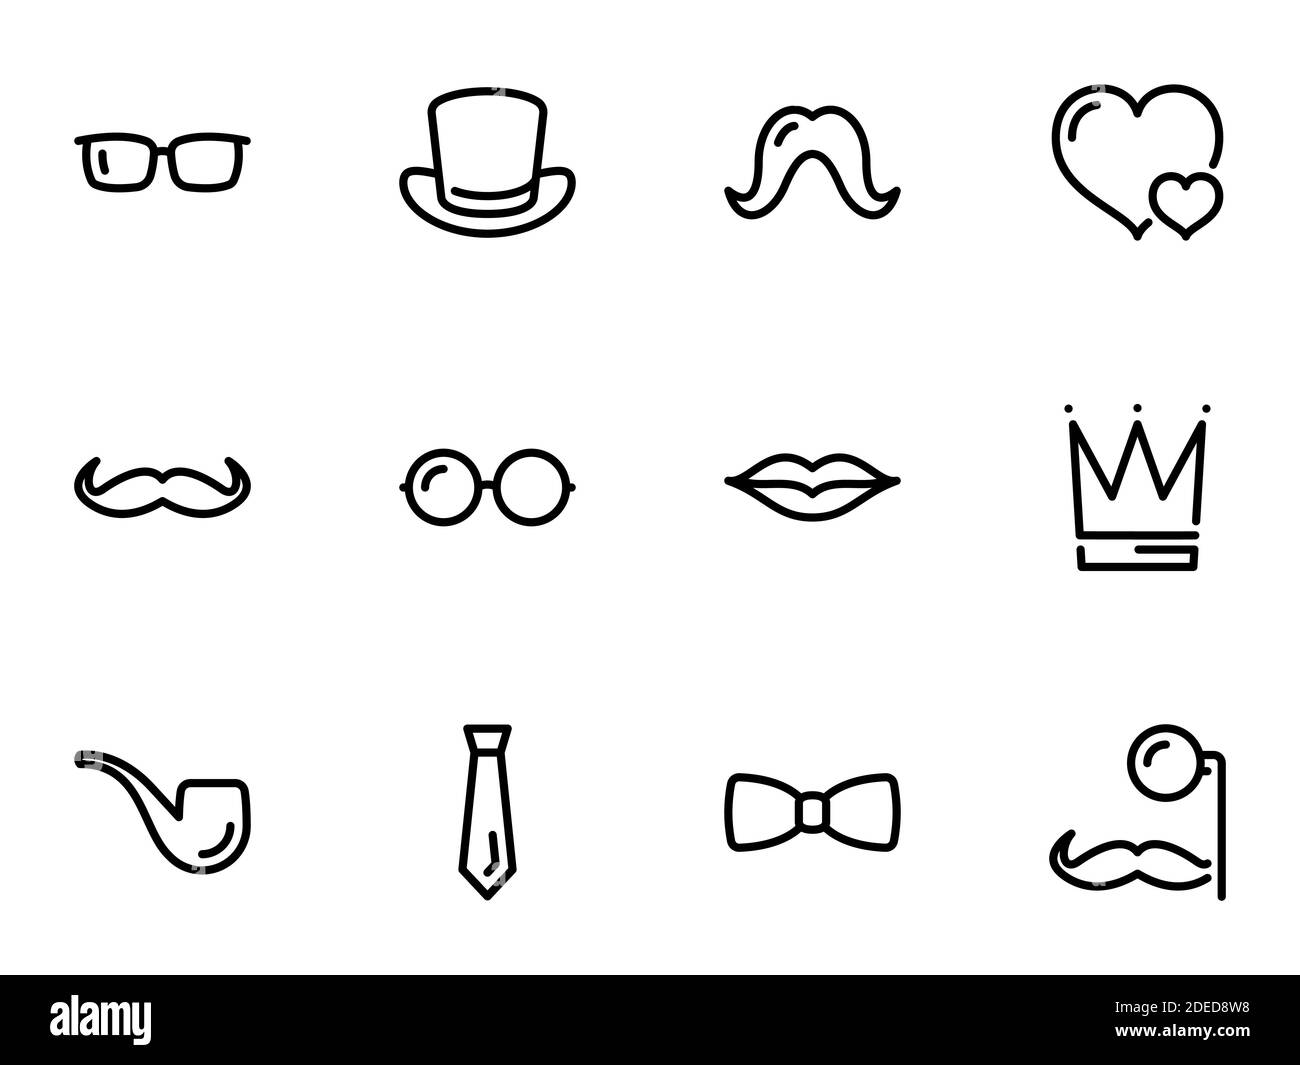 Set of black vector icons, isolated against white background. Illustration on a theme Accessories for masquerade parties and funny photos Stock Vector